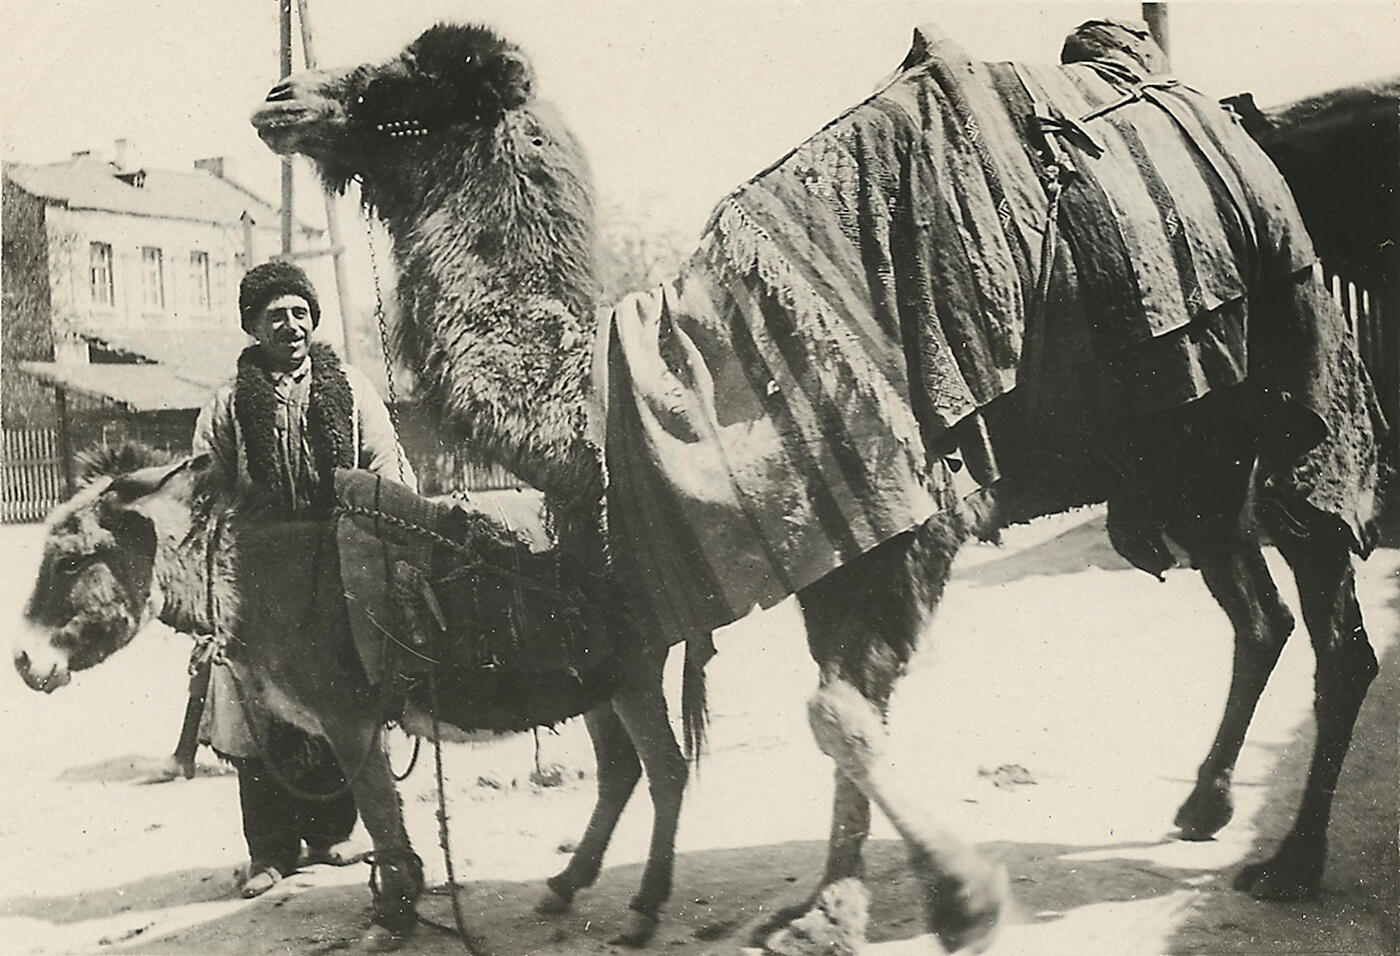 Woman in a Veil and Peasant from Quba Region Arriving to Baku